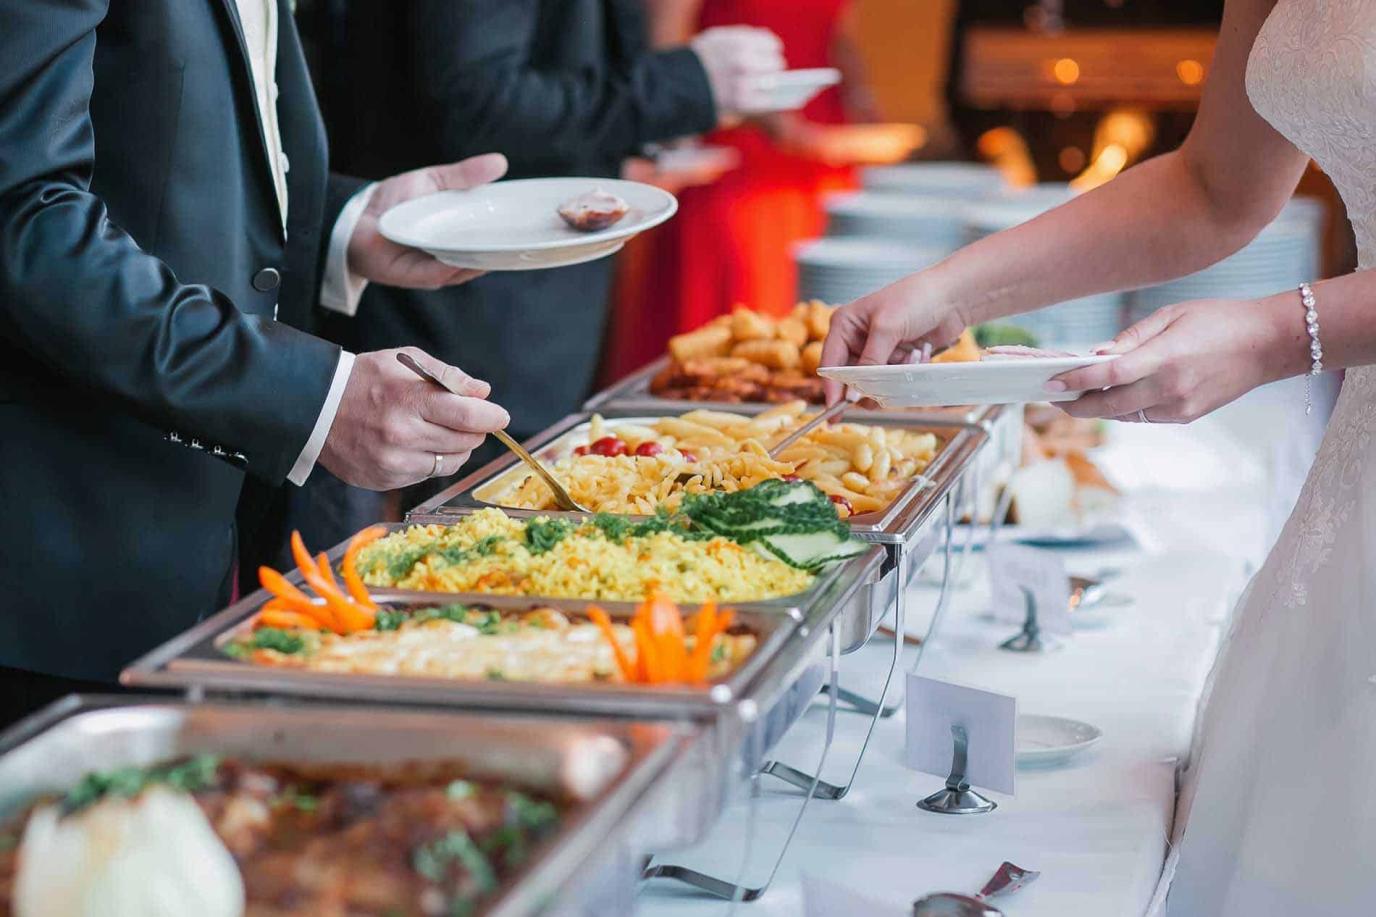 How Can I Make Sure My Catering Service Is Eco-Friendly?